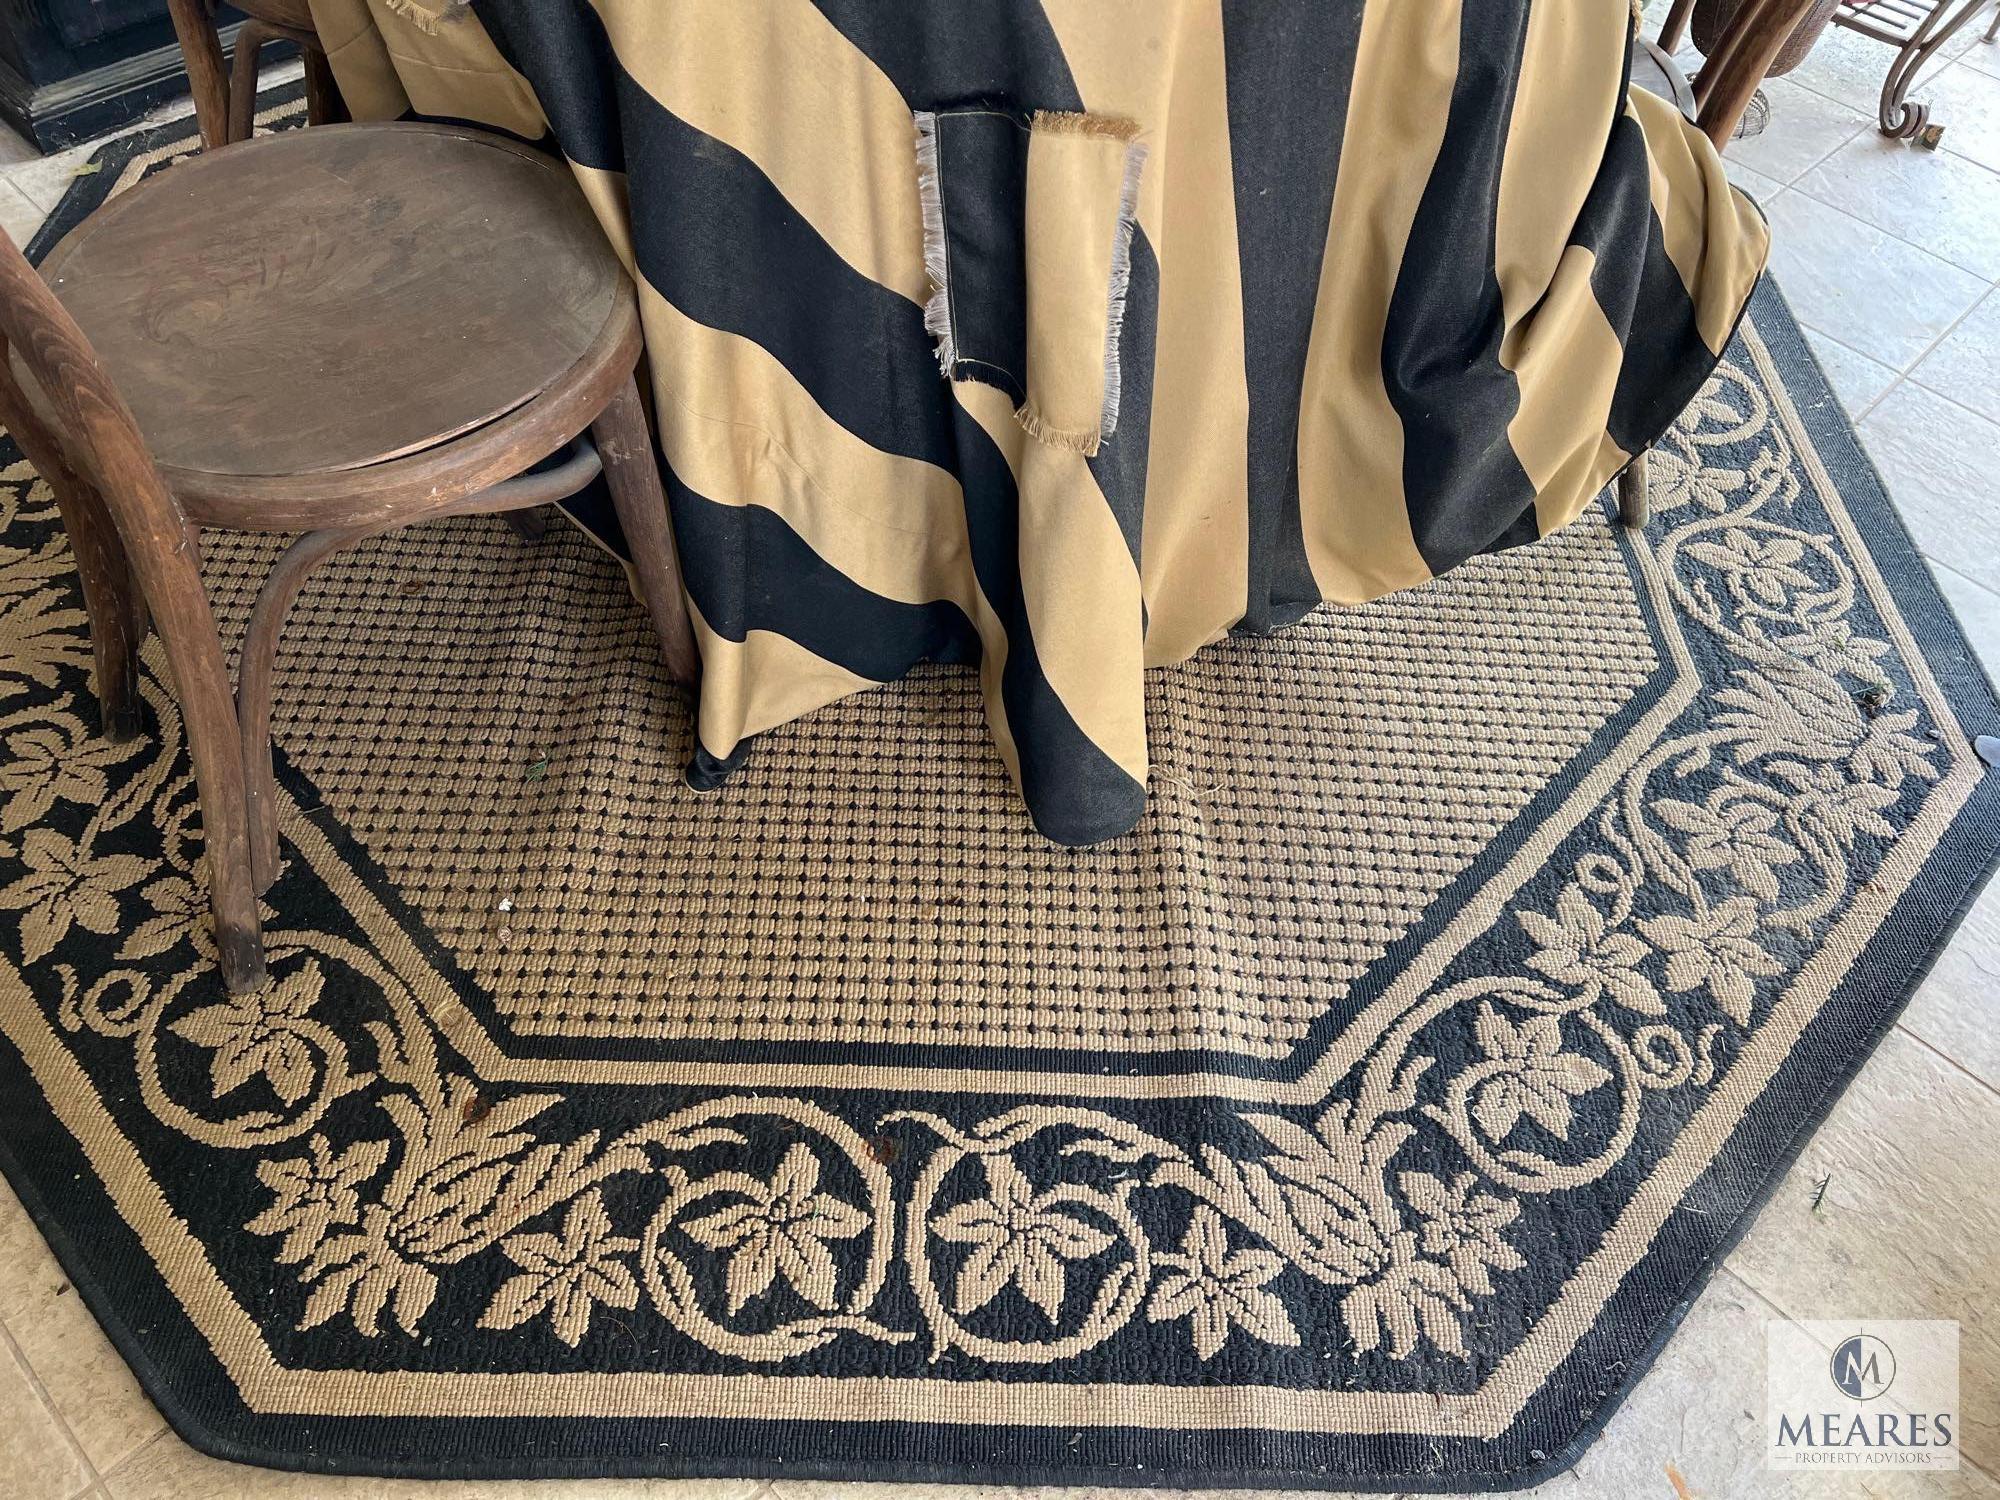 Wooden Patio Table and Chairs, with Elephant Basket and Rug